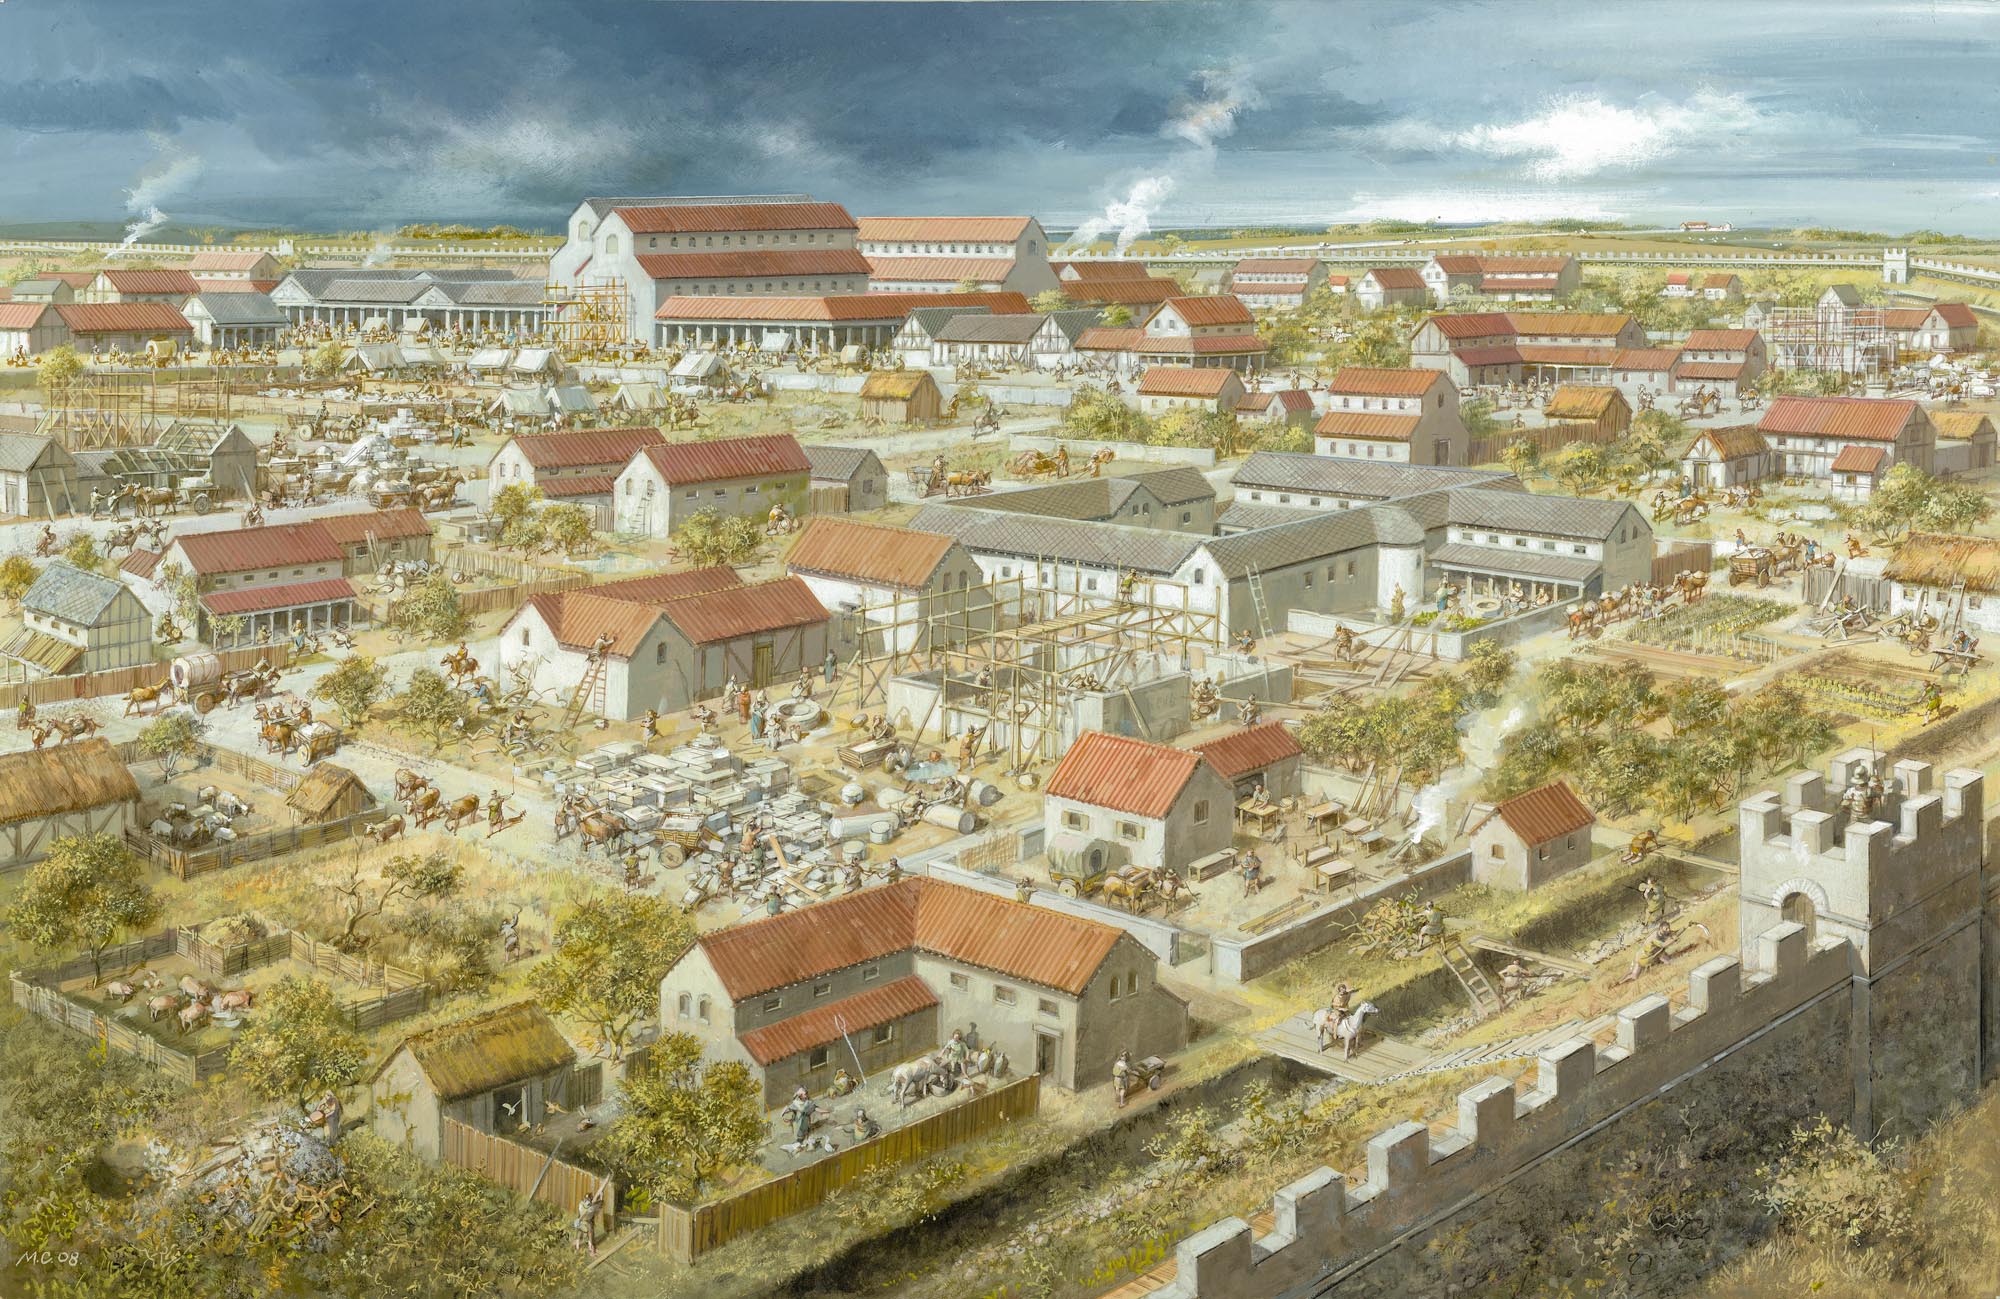 Roman Leicester from the north-east as it may have looked during the late 3rd century CE - Mike Codd  / University of Leicester Archaeological Services